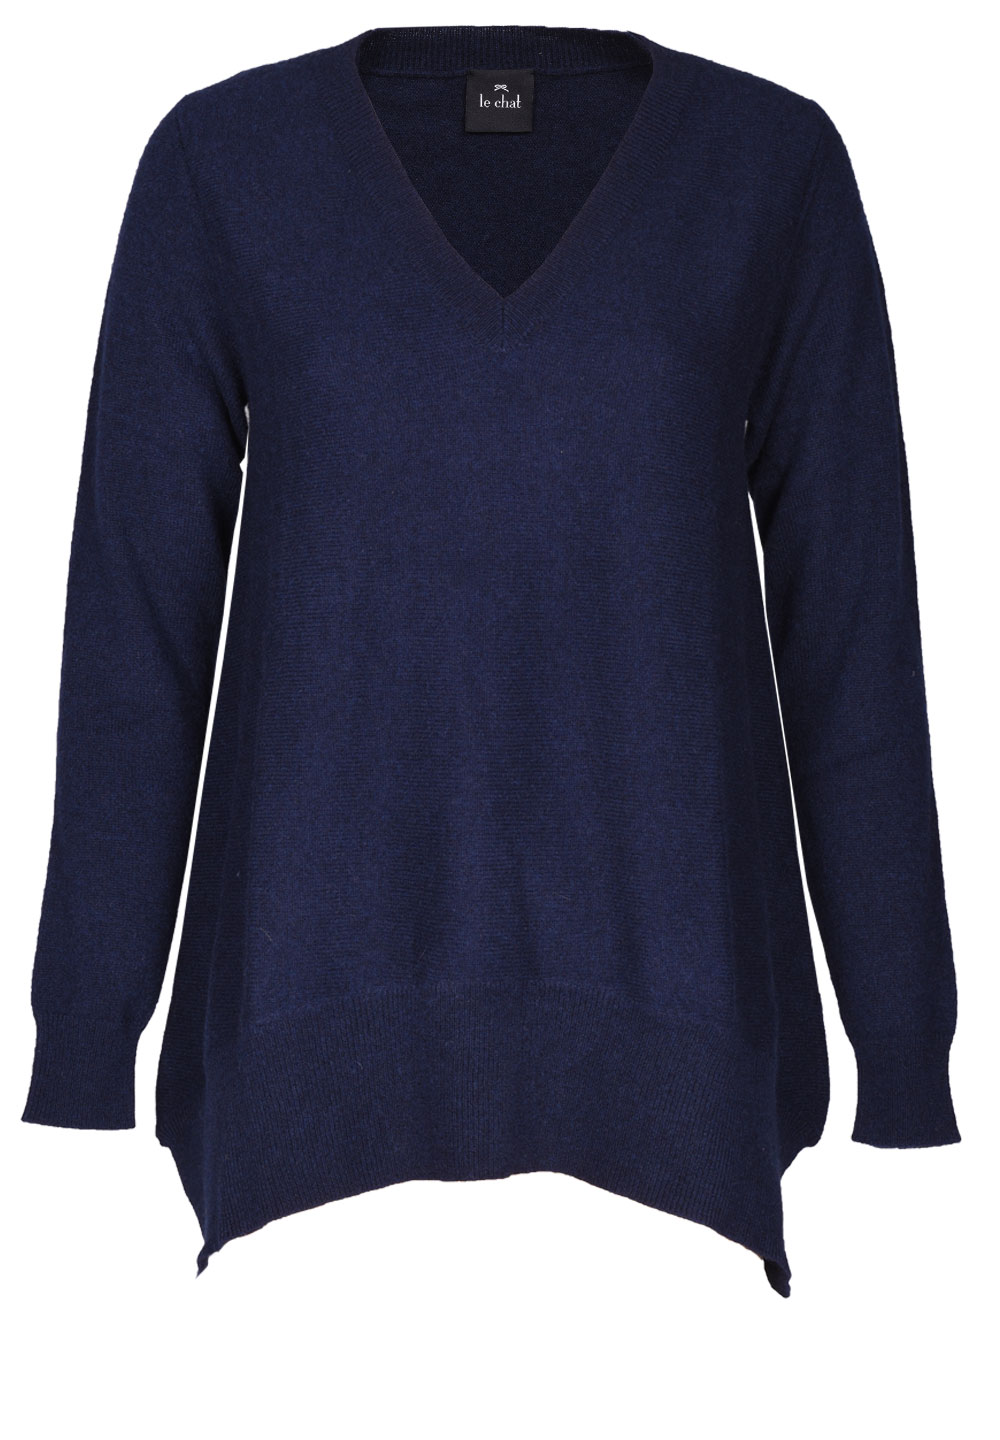 Sweater 100% CASHMERE Navy blue